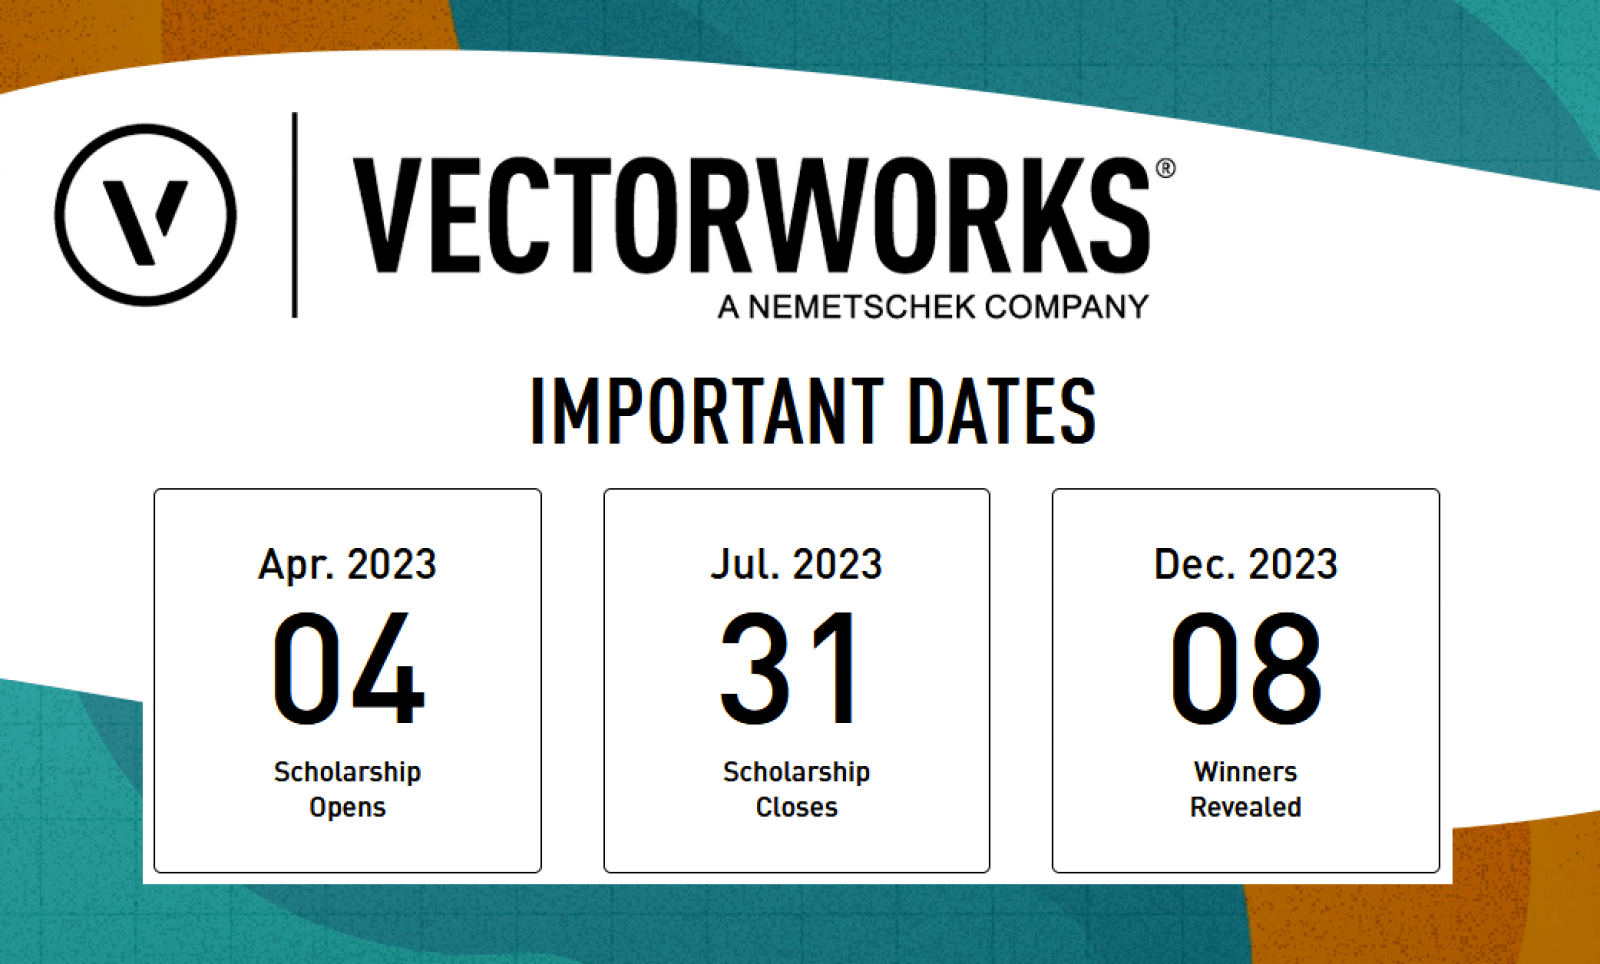 Vectorworks Design Scholarship accepting submissions for 2023